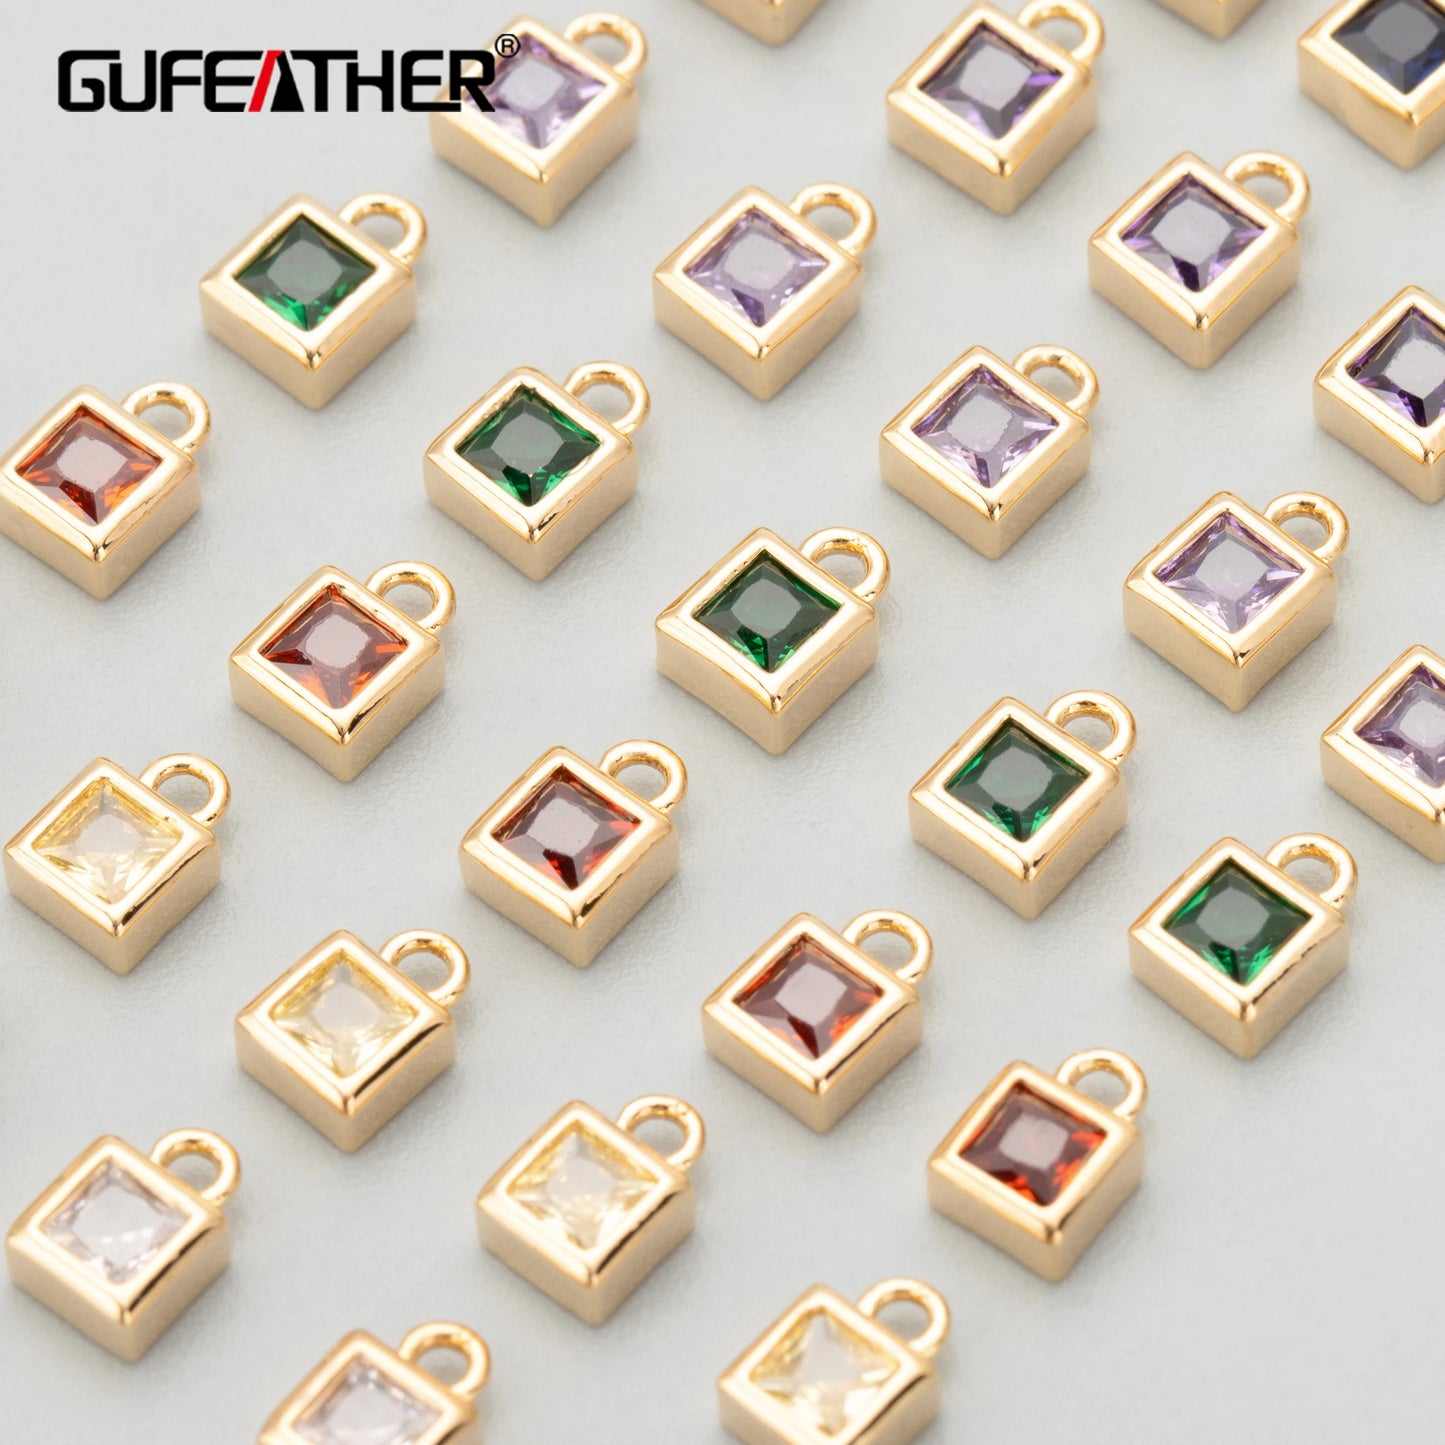 GUFEATHER MC45,jewelry accessories,18k gold plated,nickel free,copper,zircons,charms,jewelry making,diy pendants,10pcs/lot